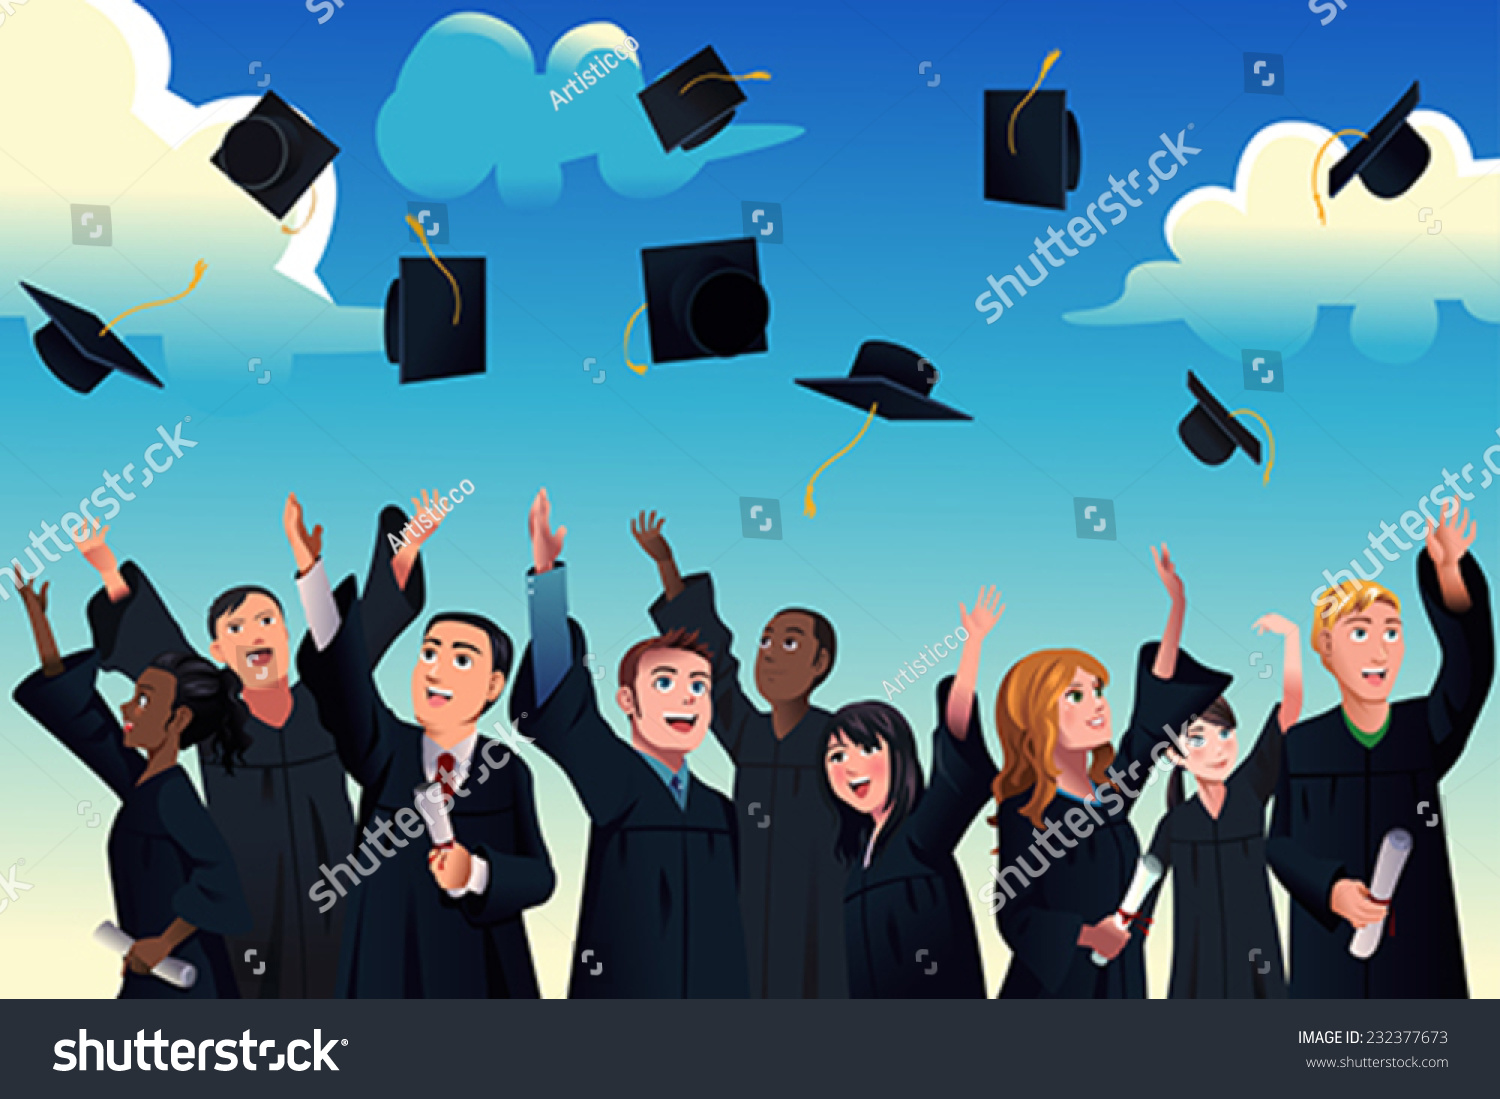 A vector illustration of students celebrating their graduation by throwing their graduation hats in the air #232377673